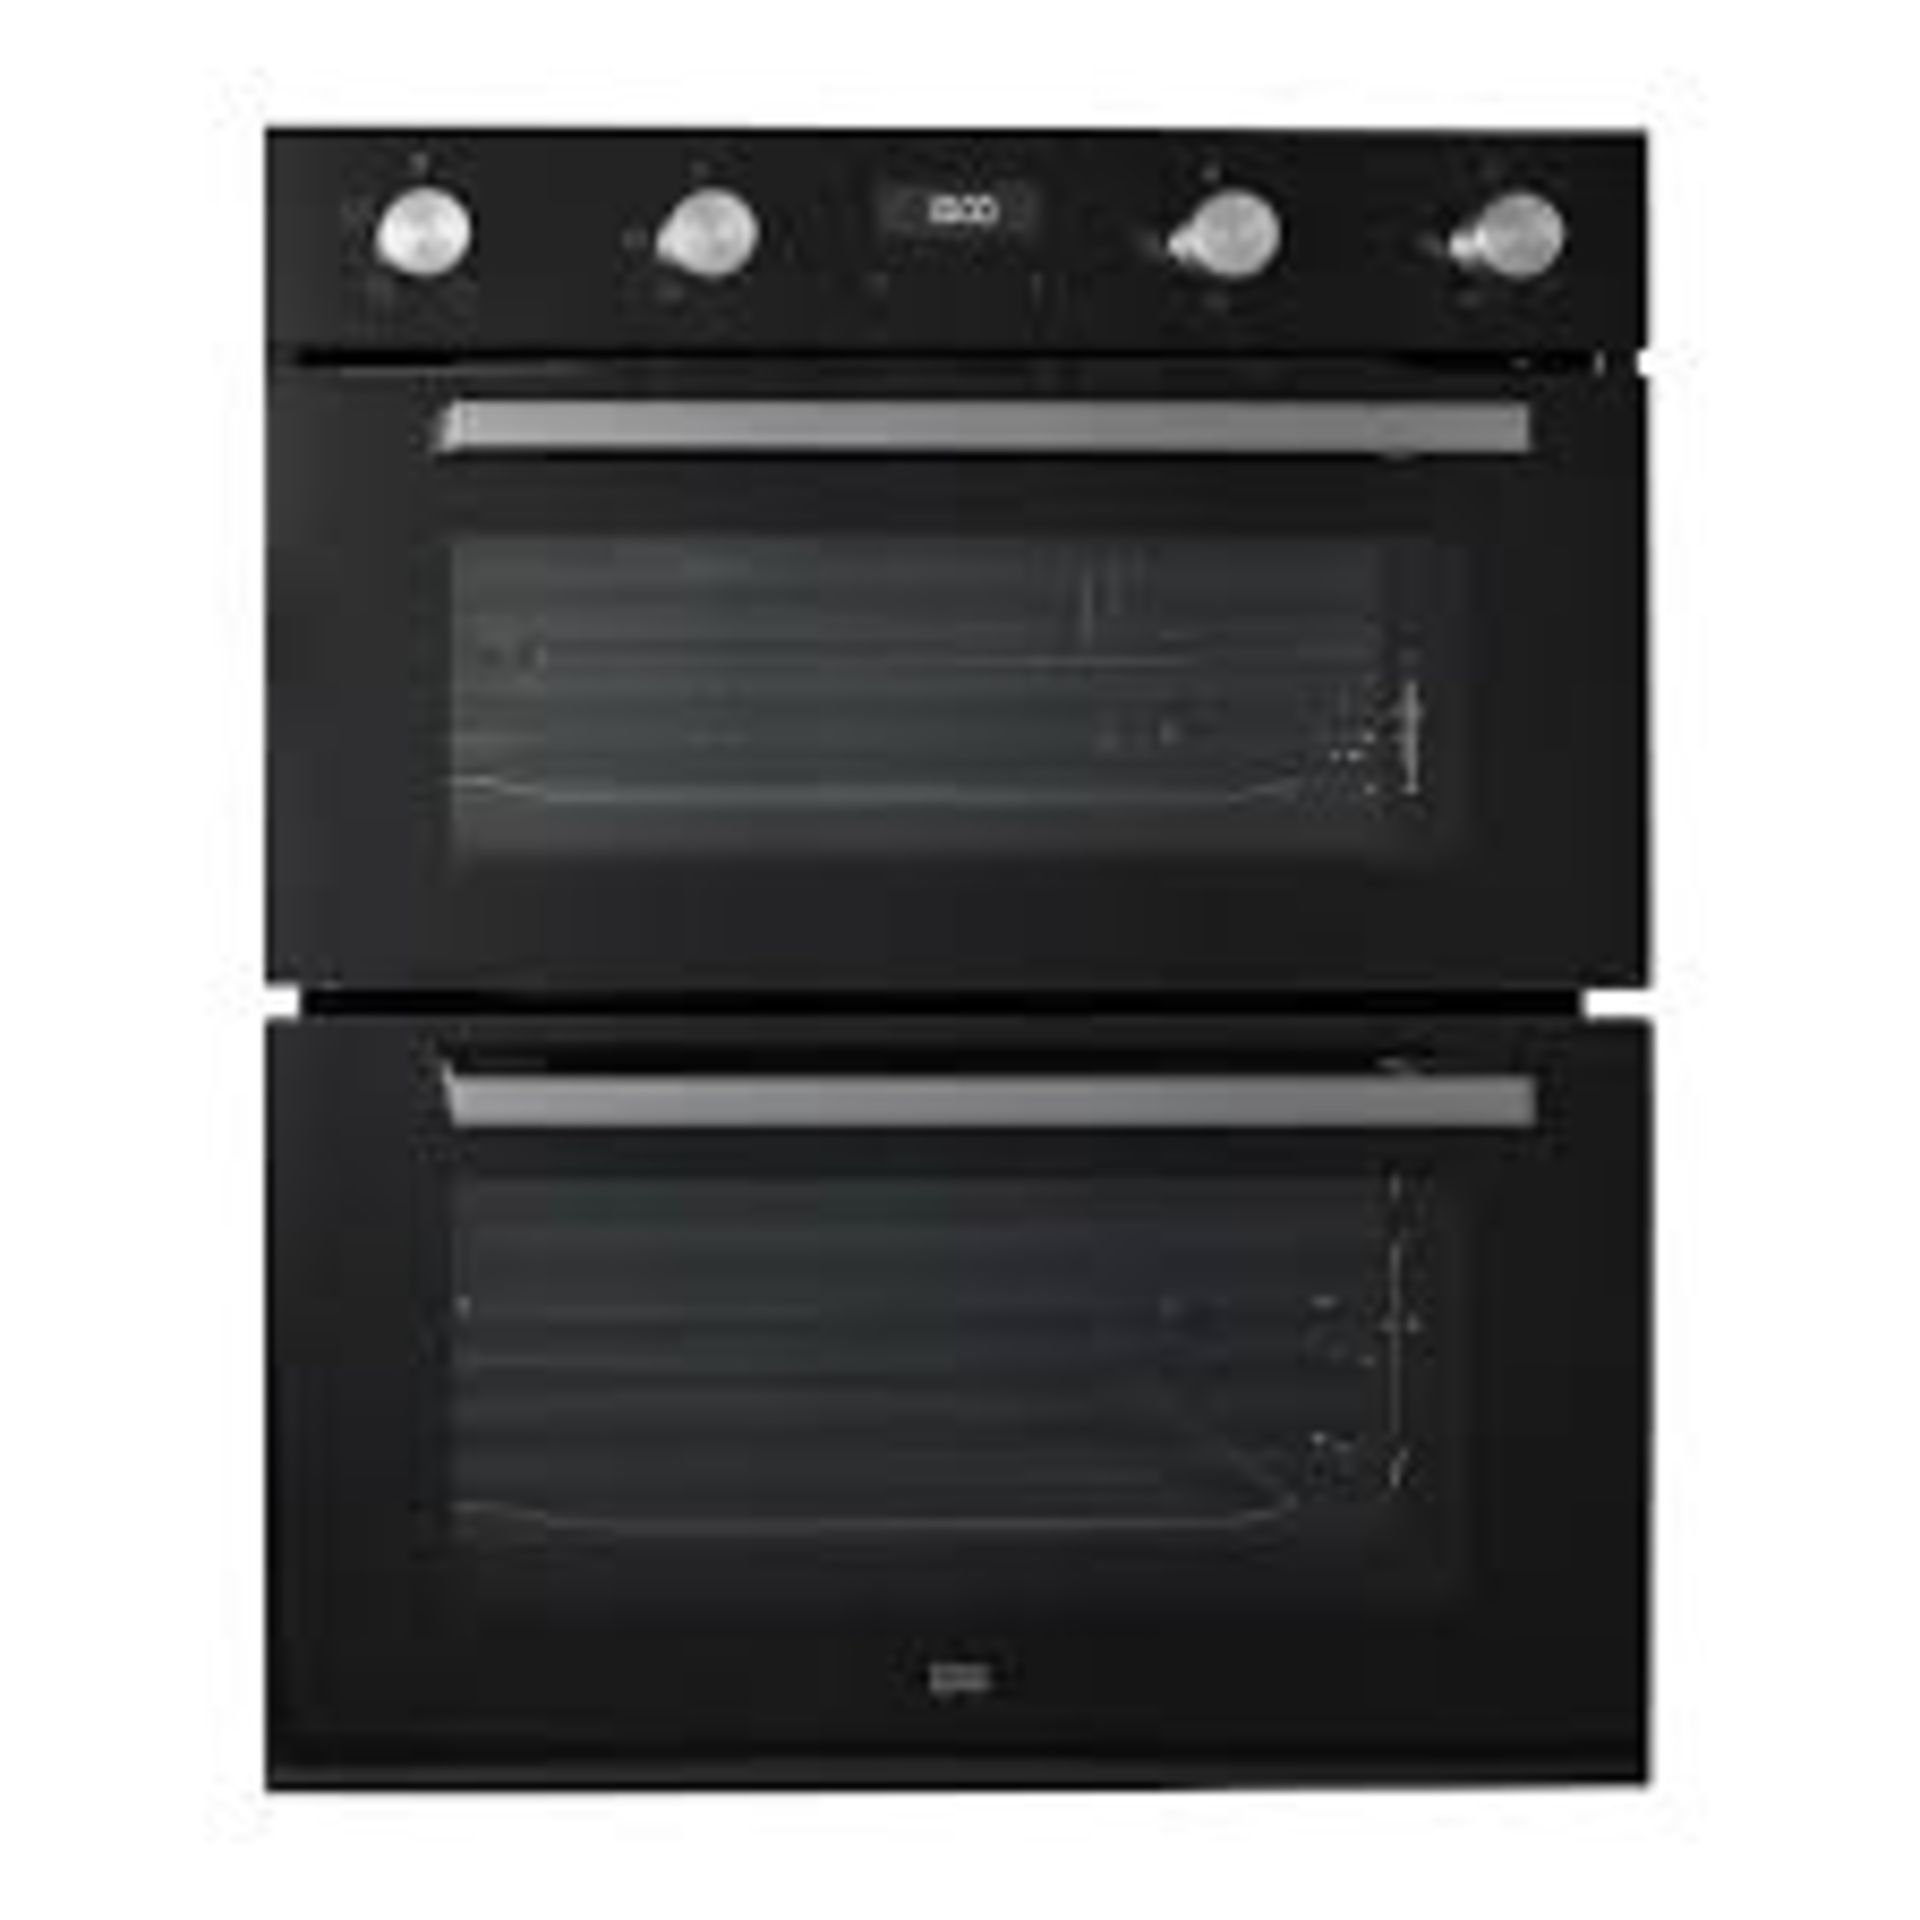 Cooke & Lewis CLBUDO89 Built-in Double oven - Mirrored black. - SR4. Enjoy more room to cook with